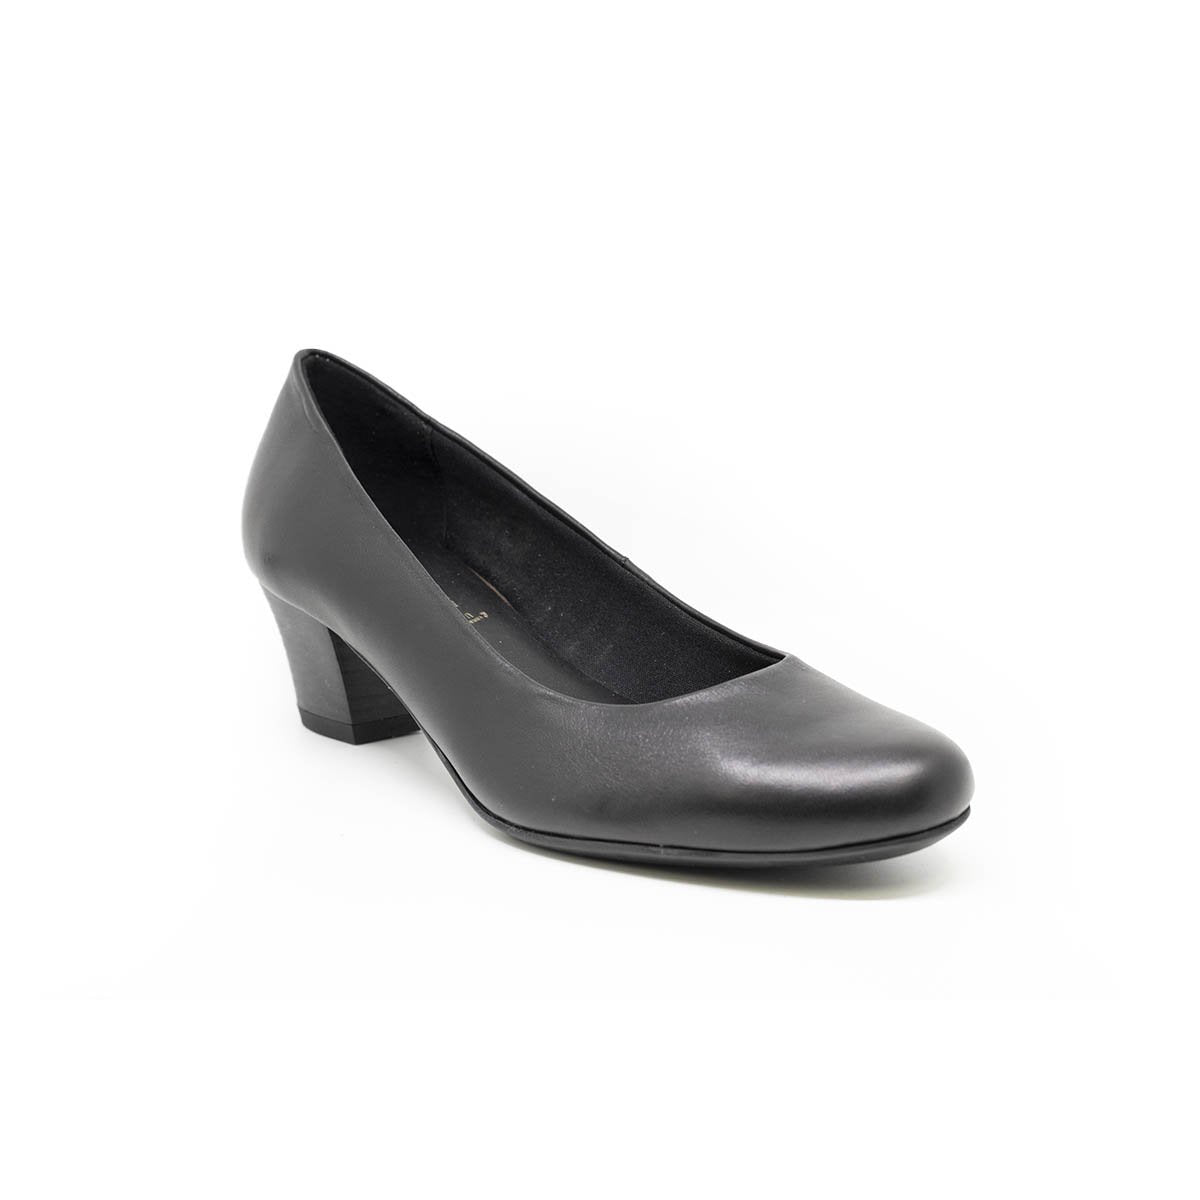 The Flexx Quality QUALITY - Clearance Shoes Black / 7.5 / 38.5  Available at Illusions Lingerie